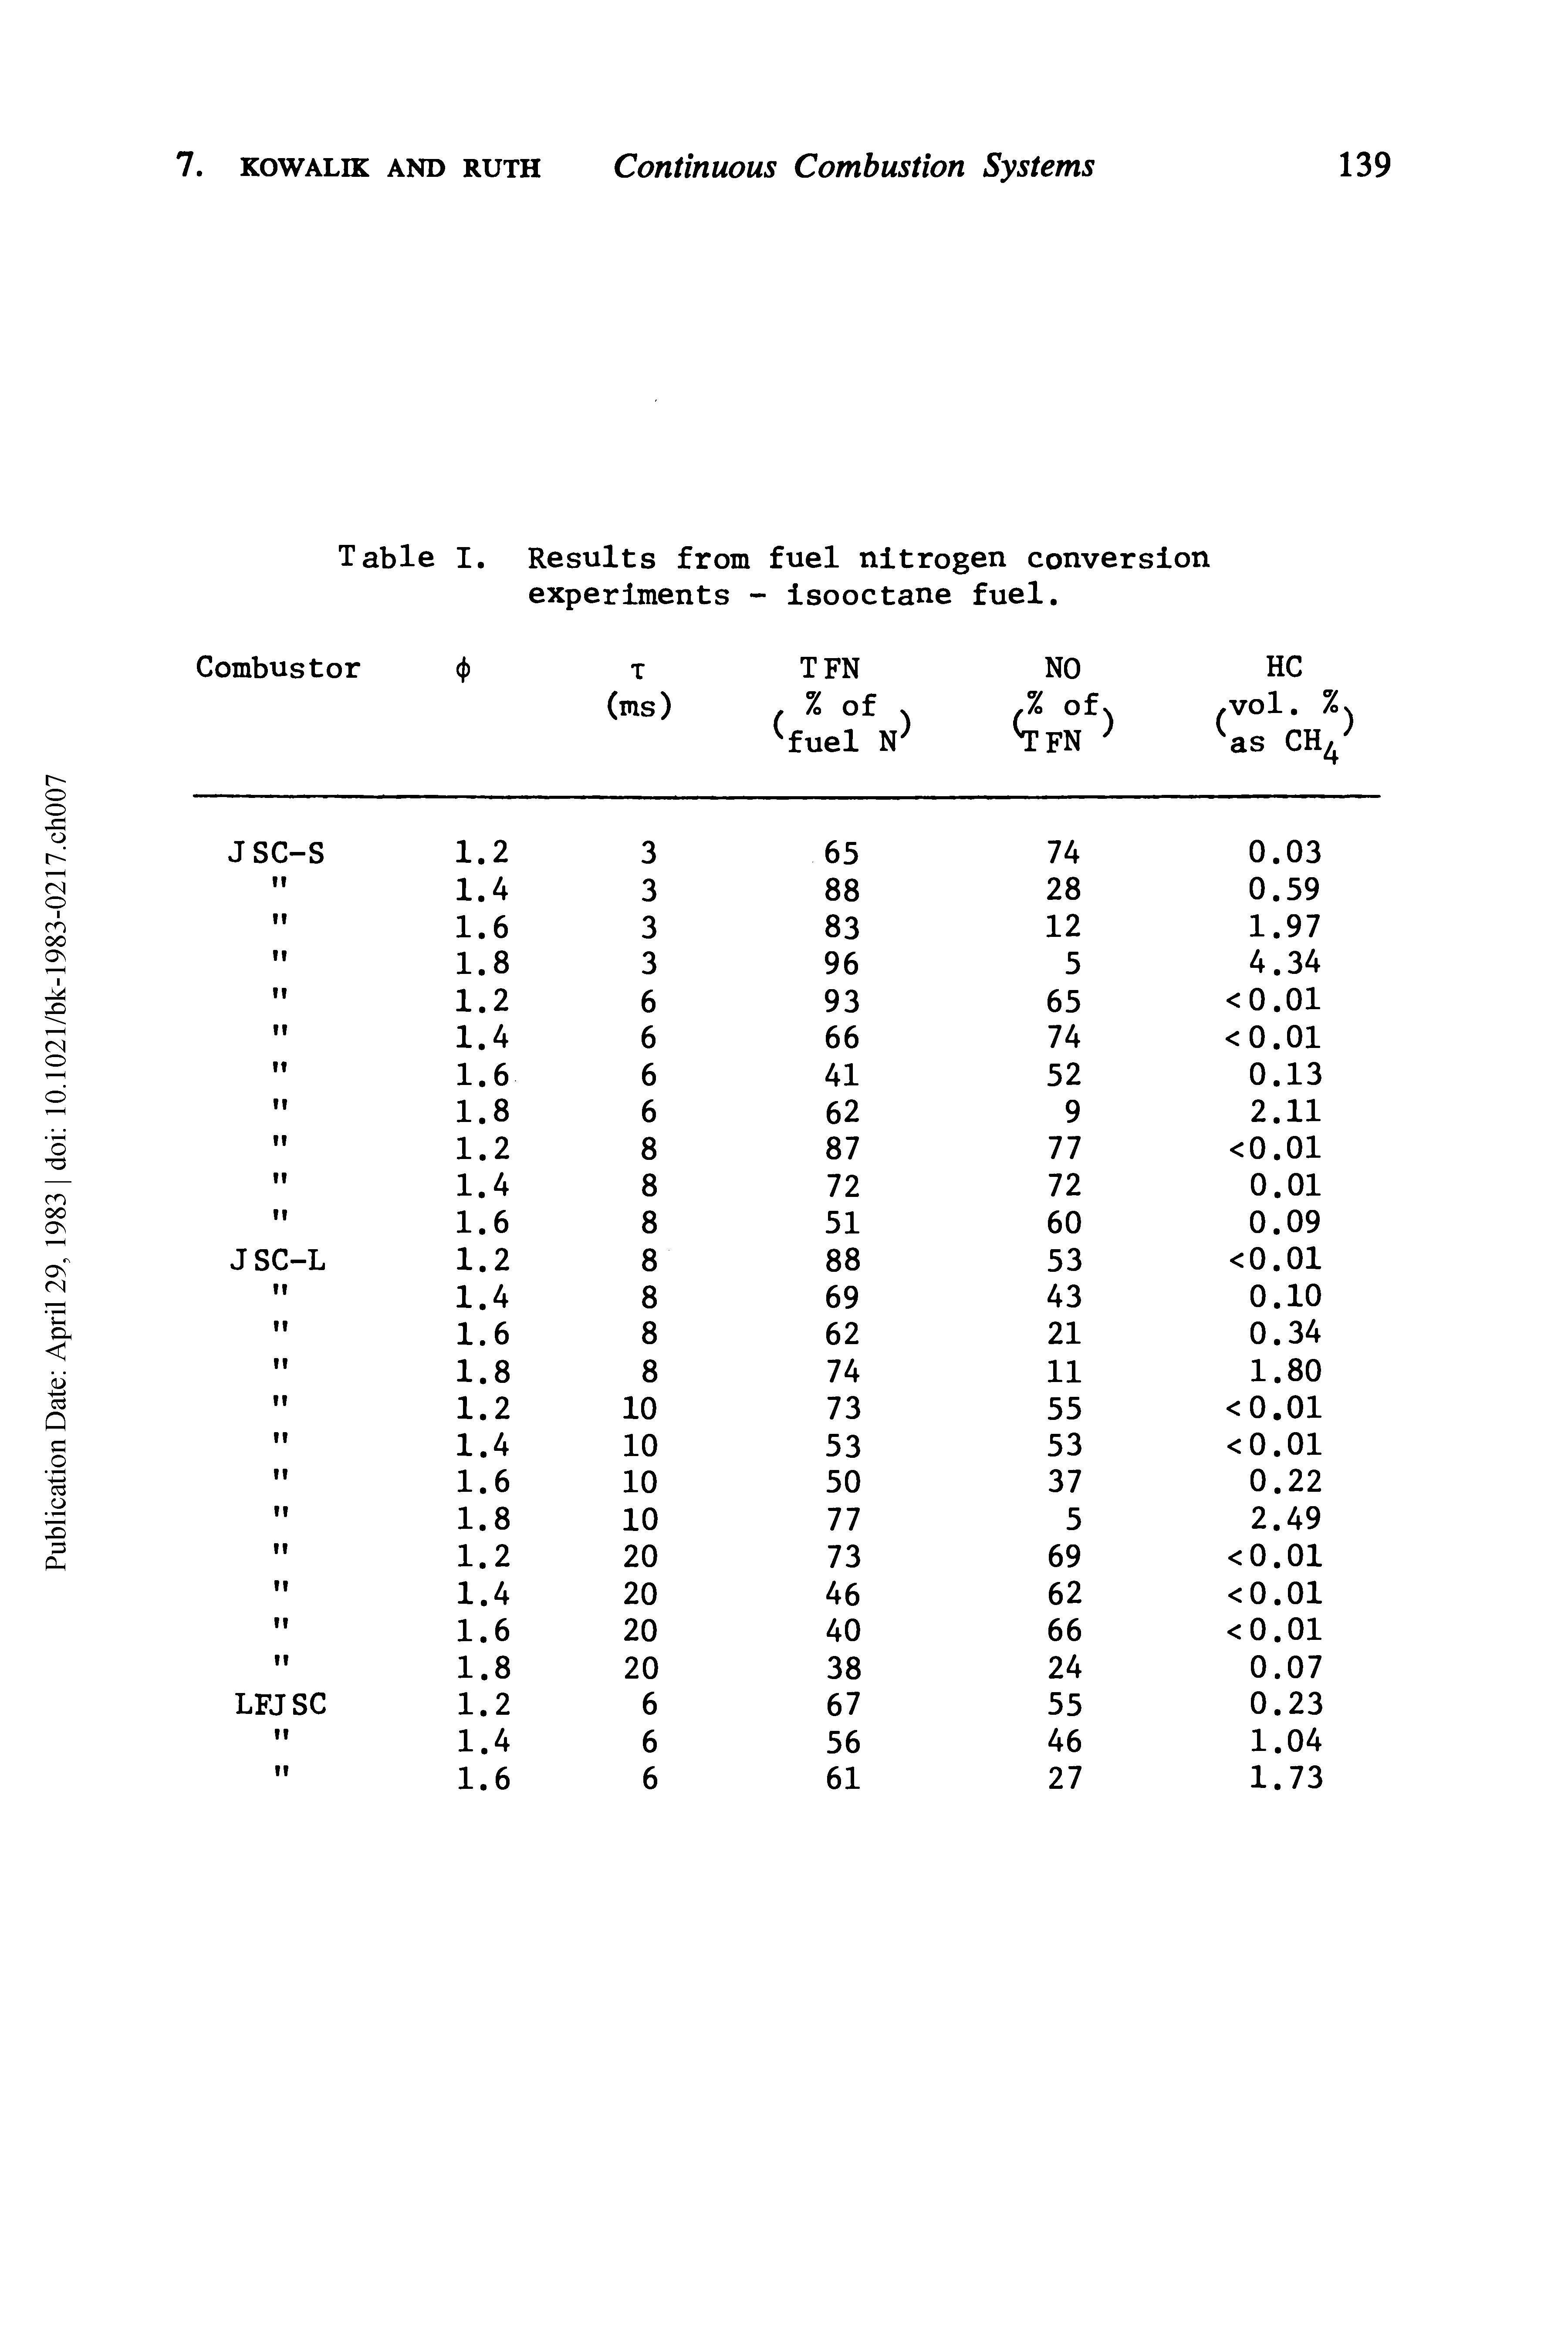 Table I. Results from fuel nitrogen conversion experiments - isooctane fuel.